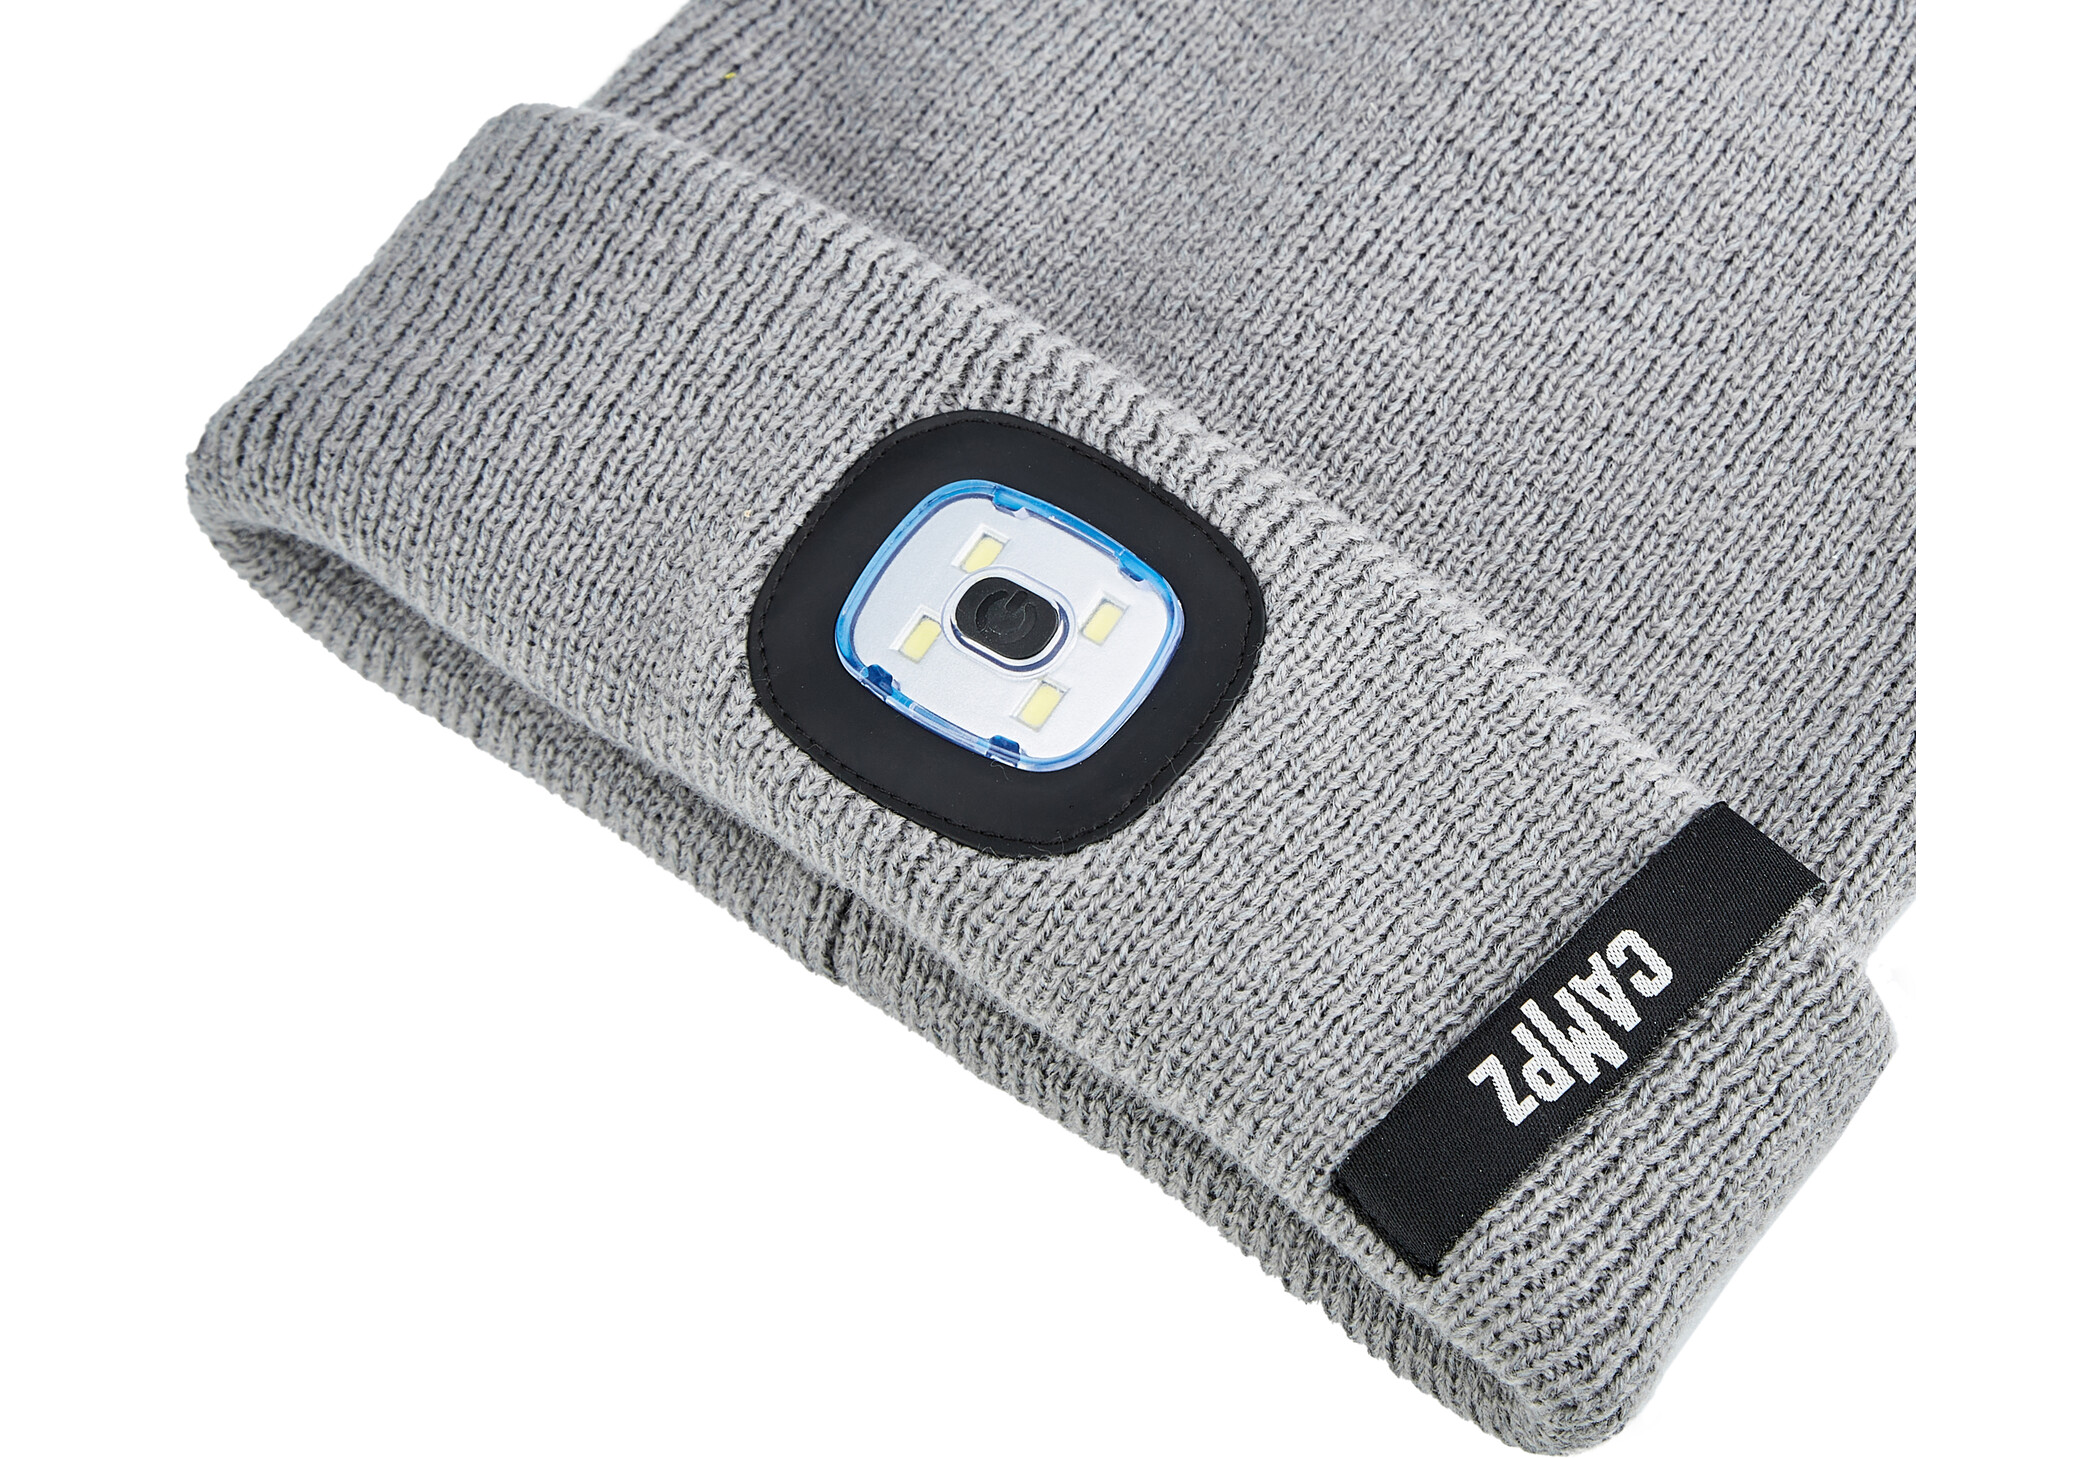 CAMPZ Knitted Reflective LED Beanie grey